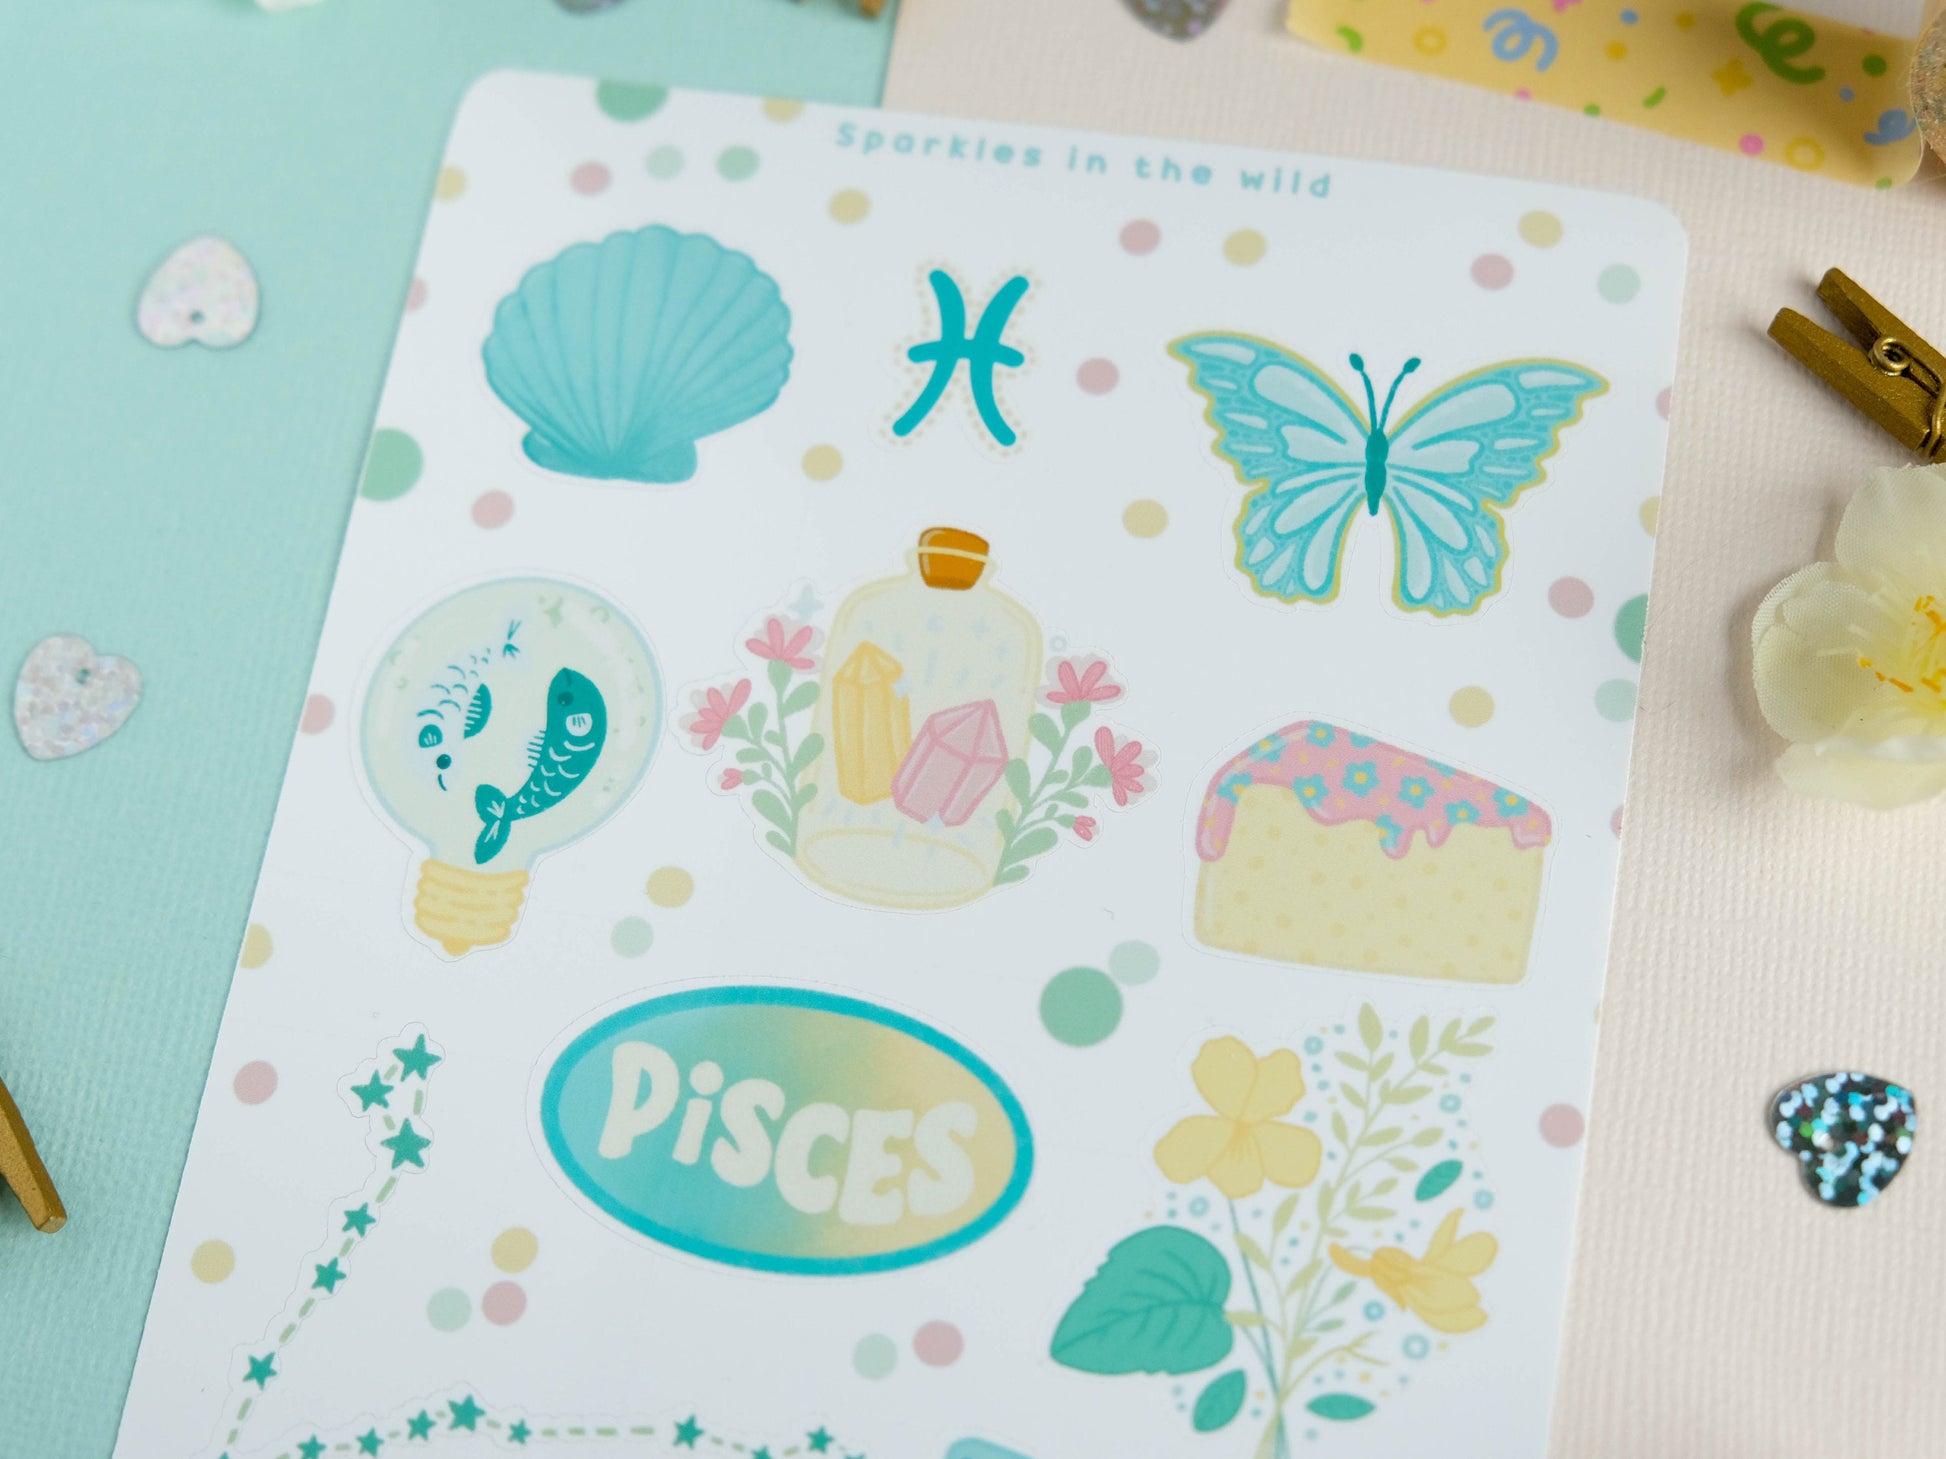 Sticker sheet Pisces astrology enthusiasts - Add a personal touch to your favorite items with this unique collection of Pisces stickers.